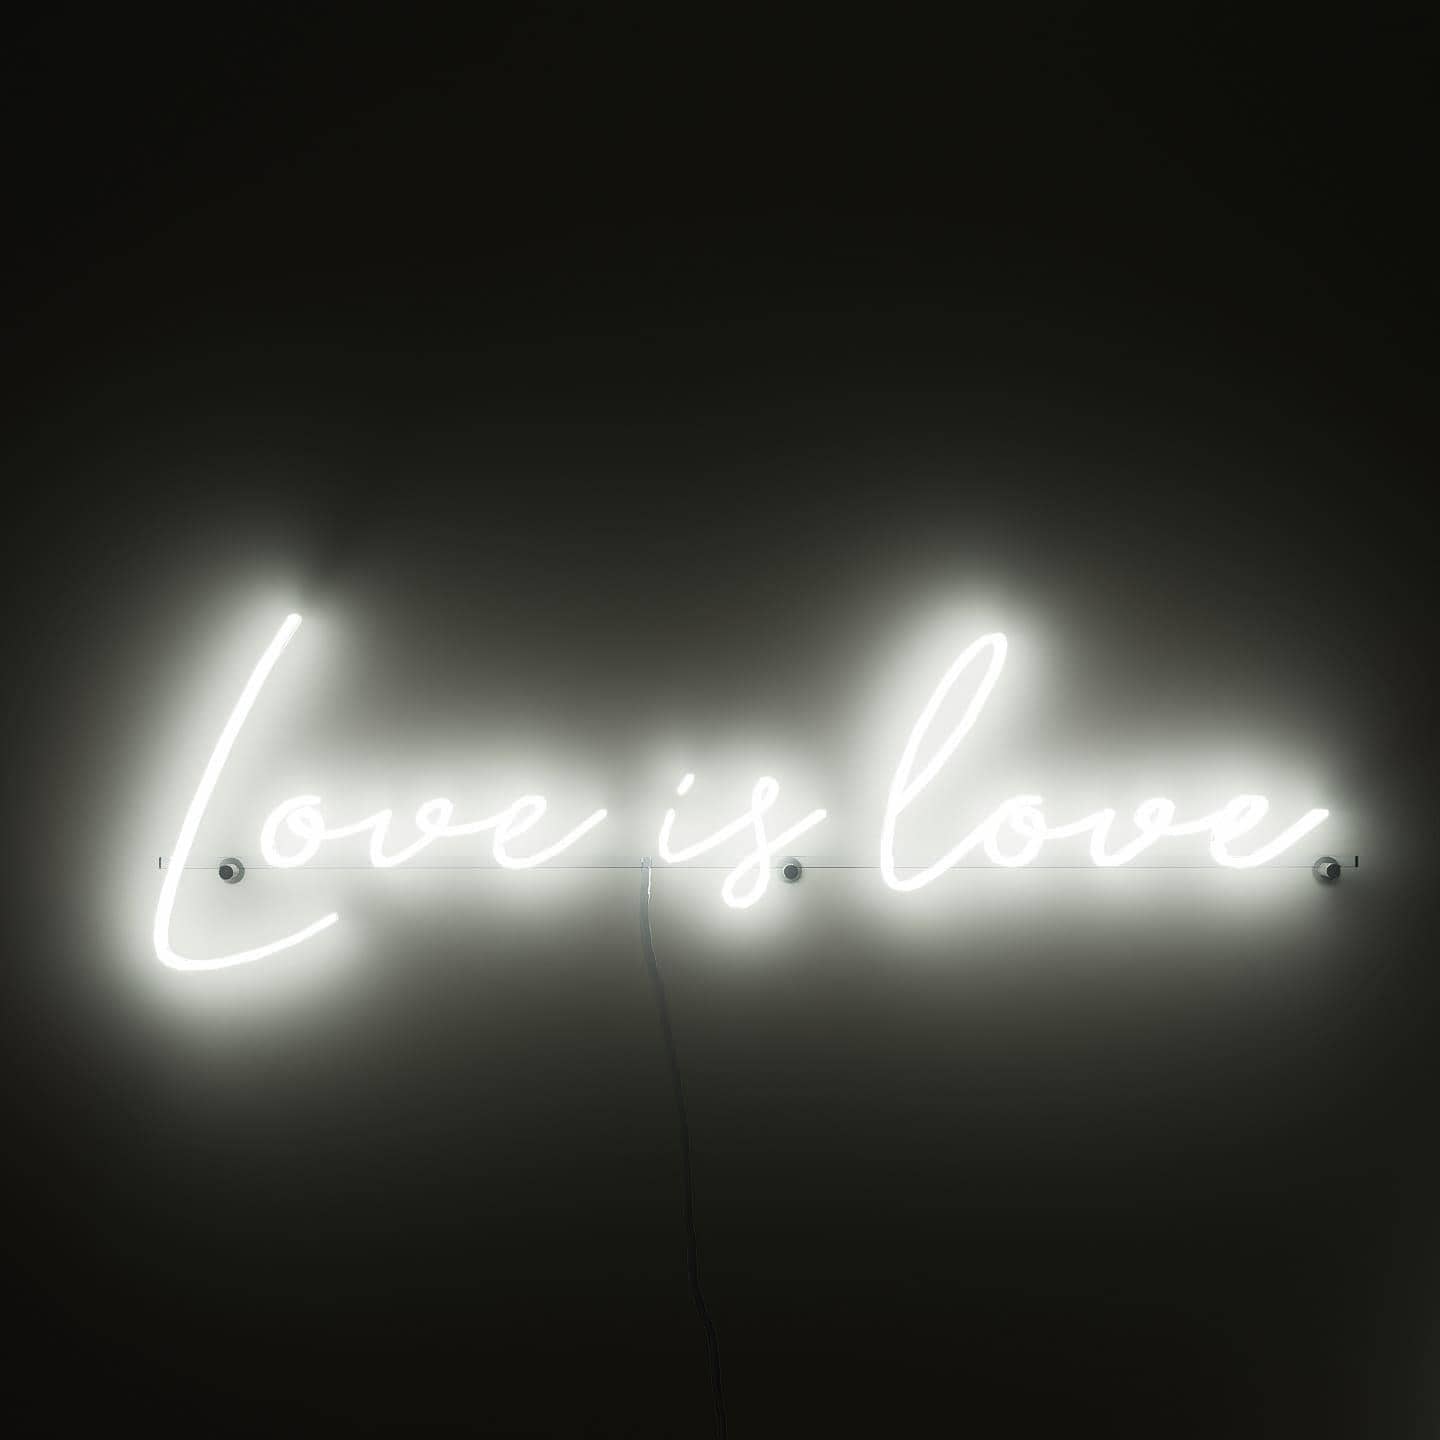 dark-night-shot-with-lit-white-neon-lights-hanging-on-the-wall-for-display-love-is-love